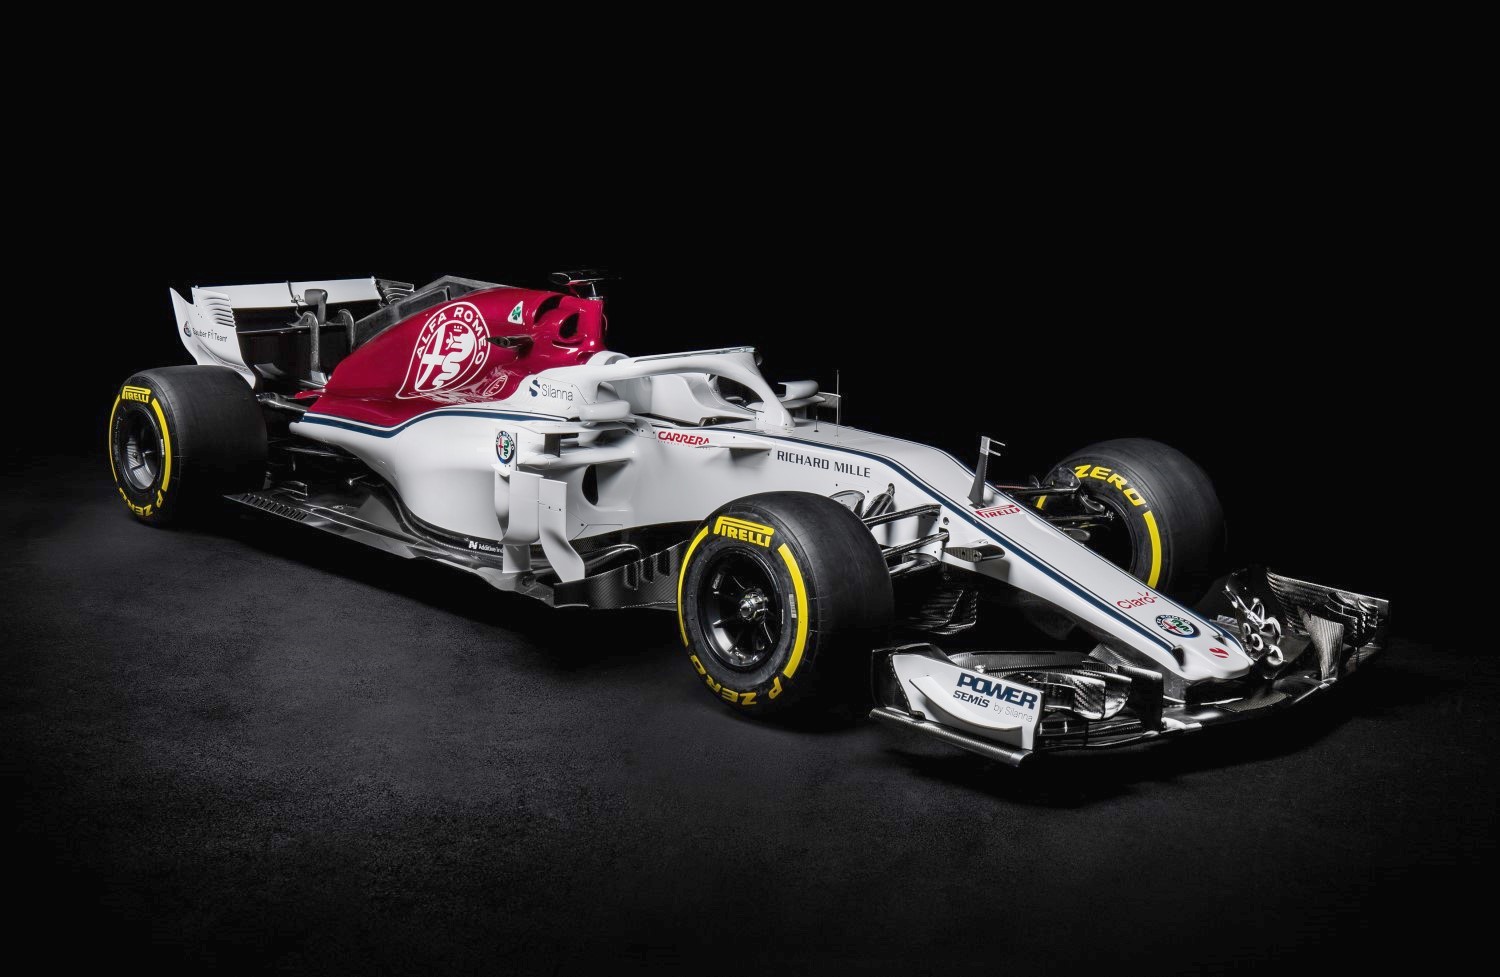 The Alfa Romeo in the Sauber must be identical to the factory Ferrari engine